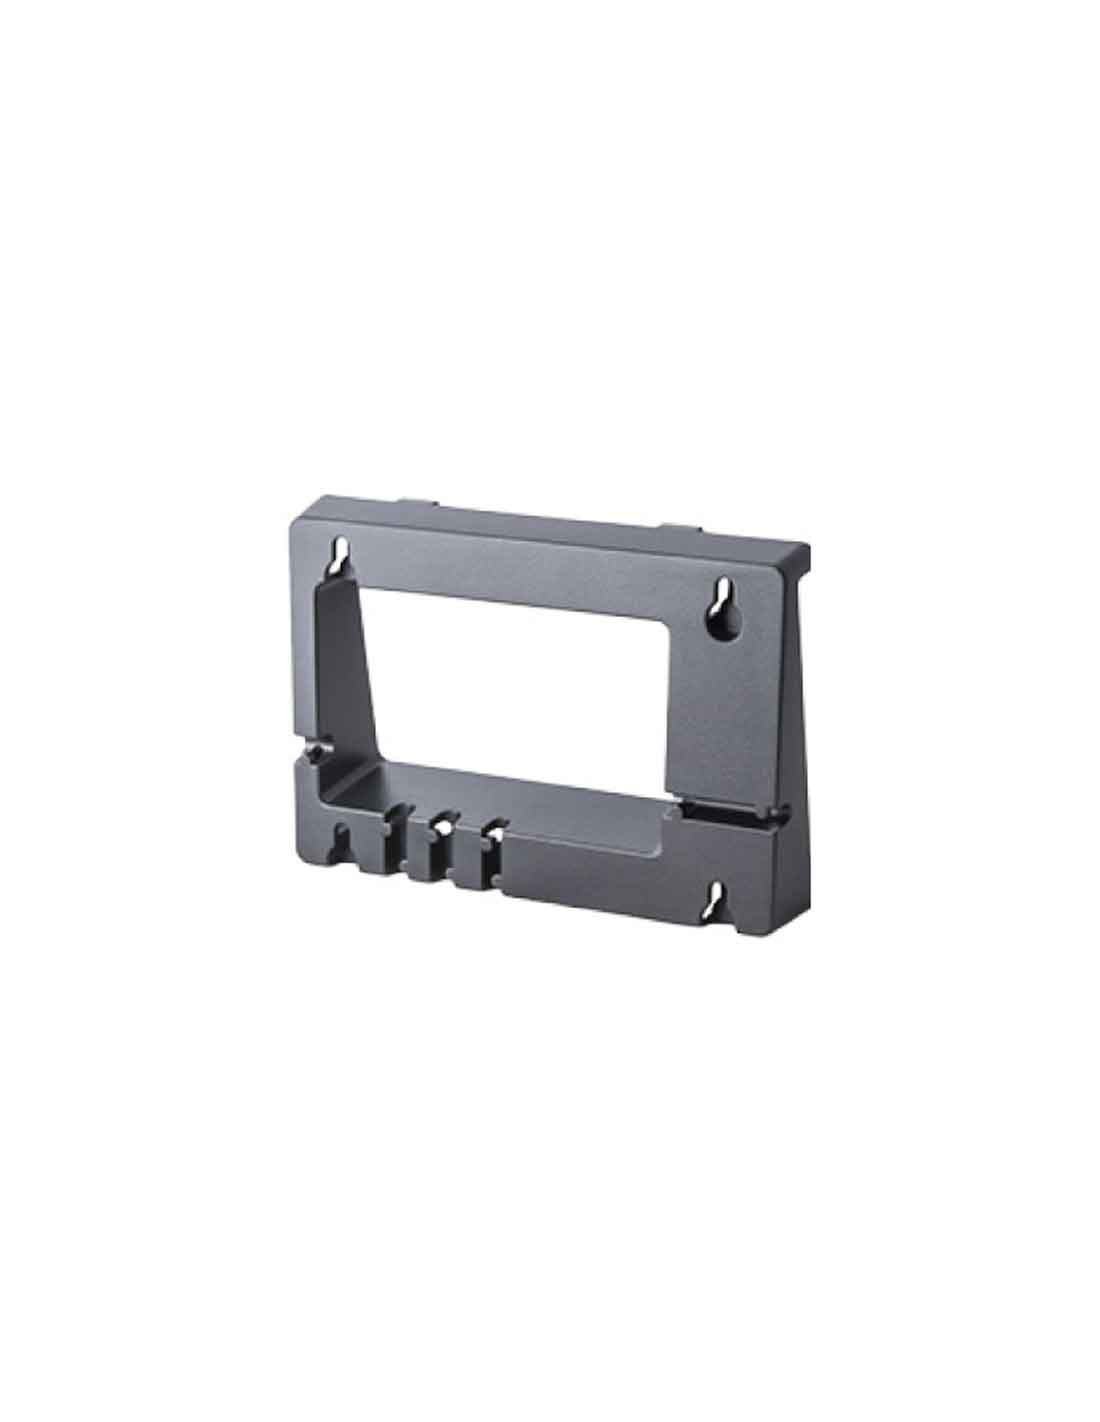 Yealink Wall Mount Bracket for T48G/T46G at a cheap price and free delivery in Dubai